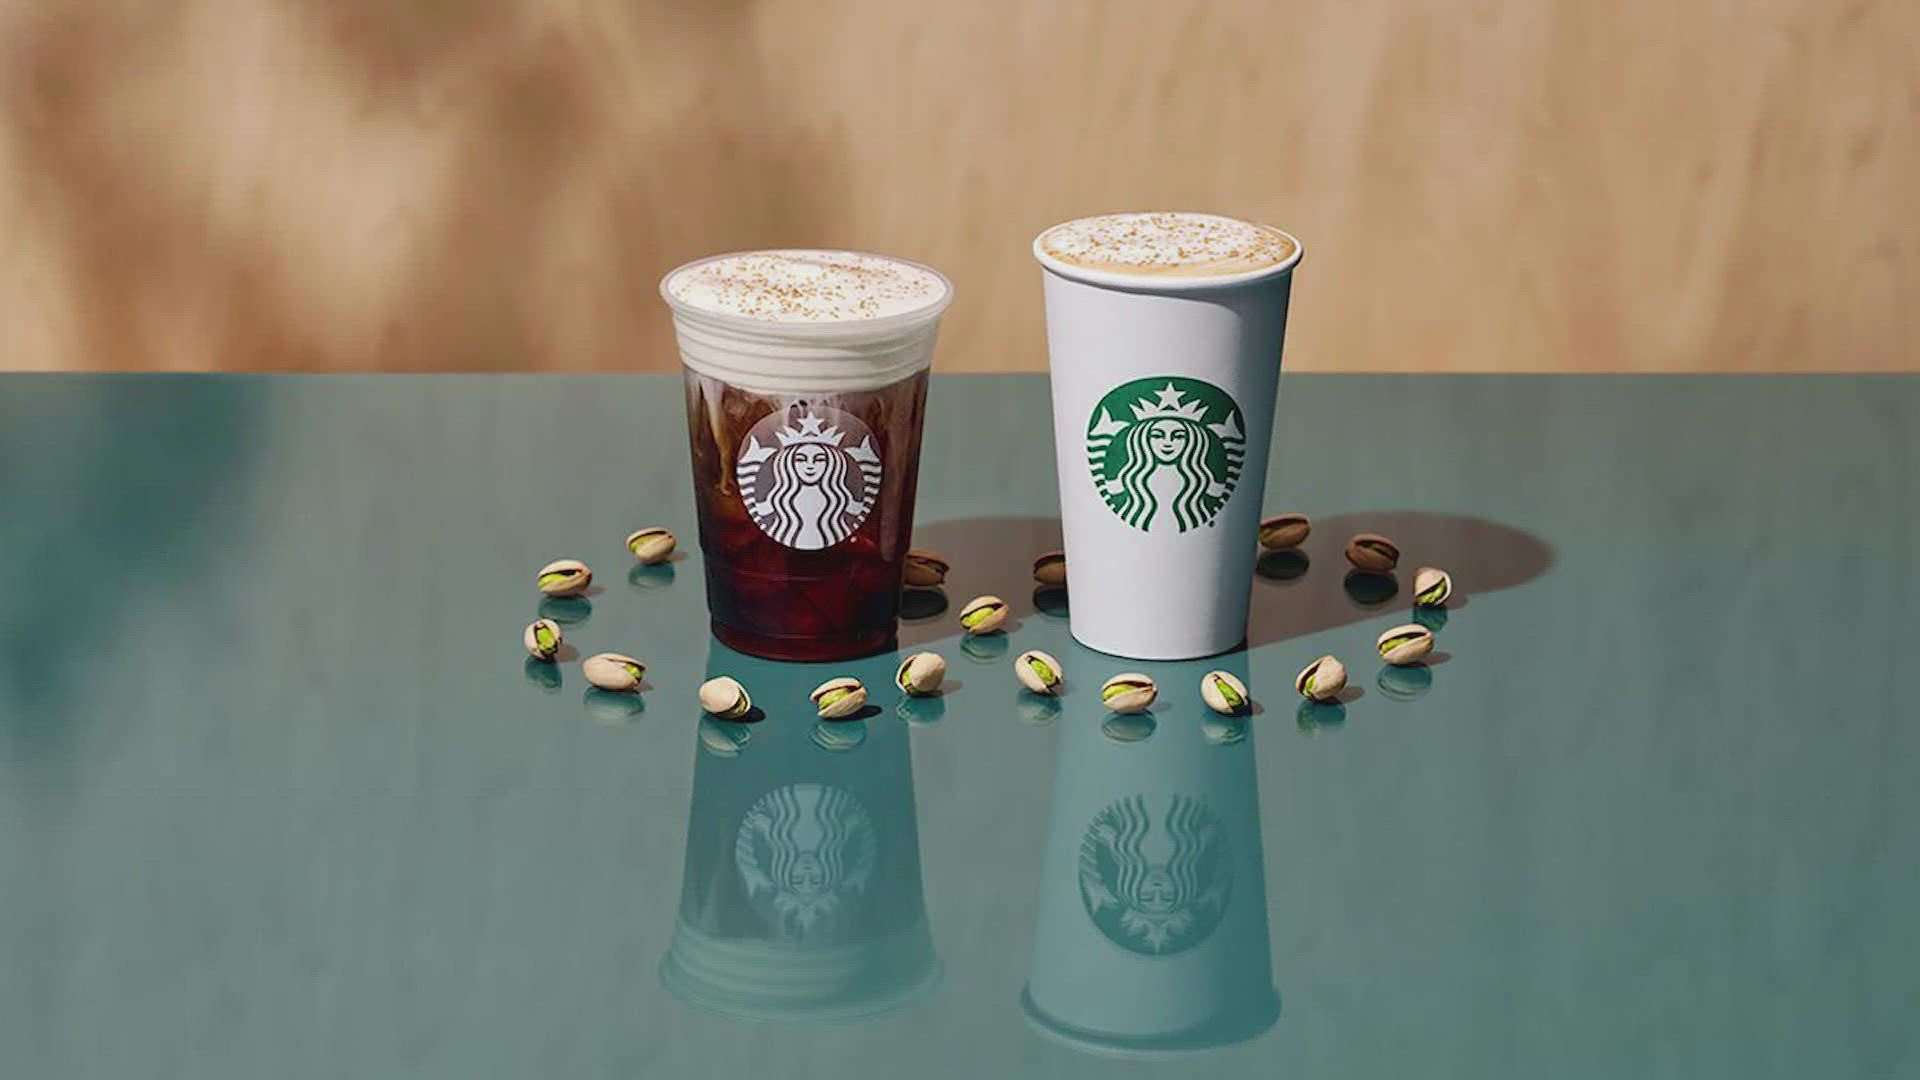 The new Starbucks offerings include a pistachio cream cold brew, pistachio latte and red velvet loaf.